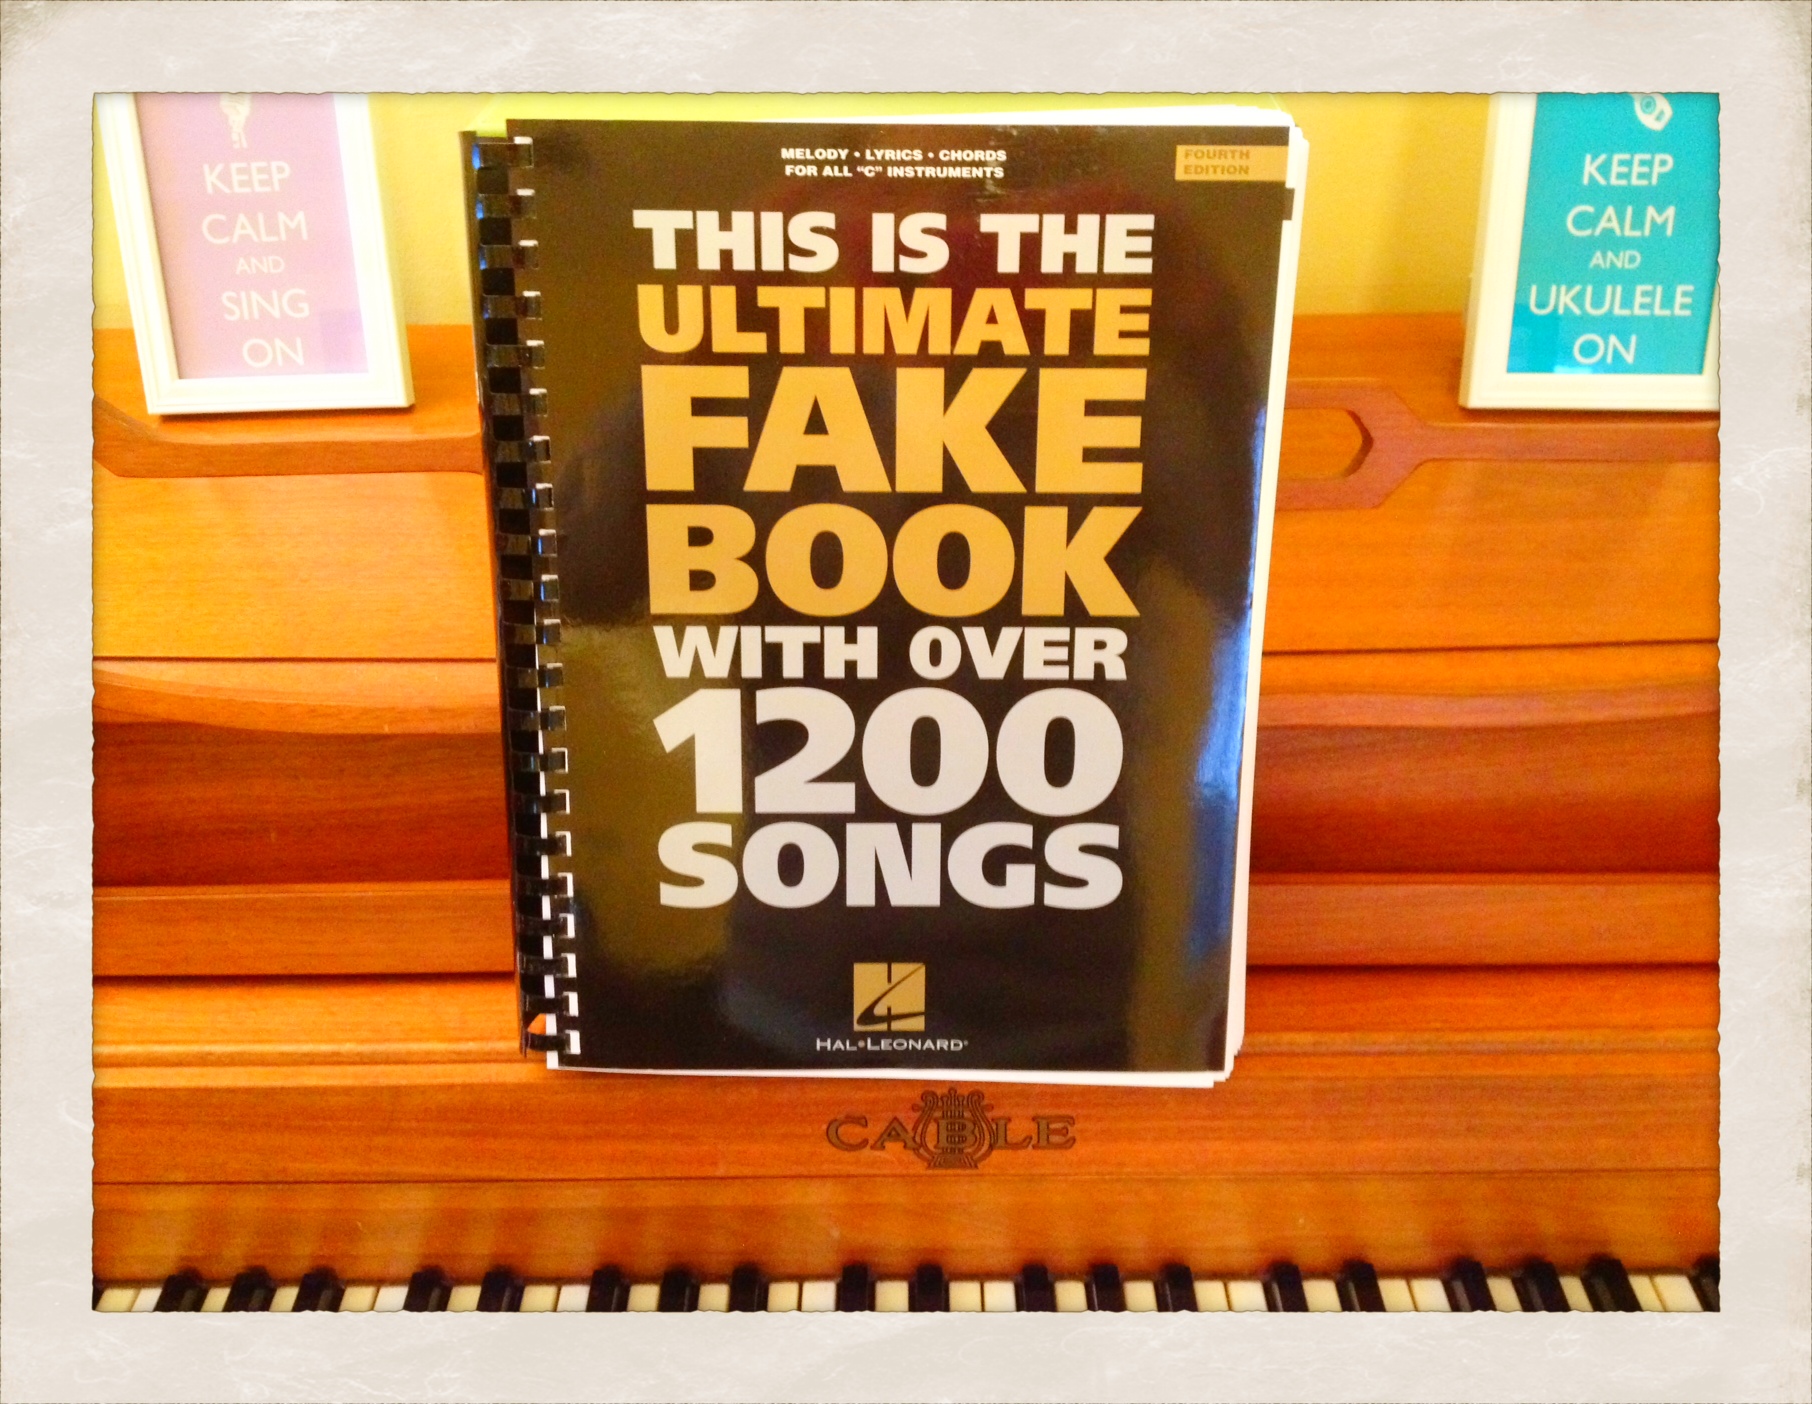 Friday Fave: The ULTIMATE Fake Book